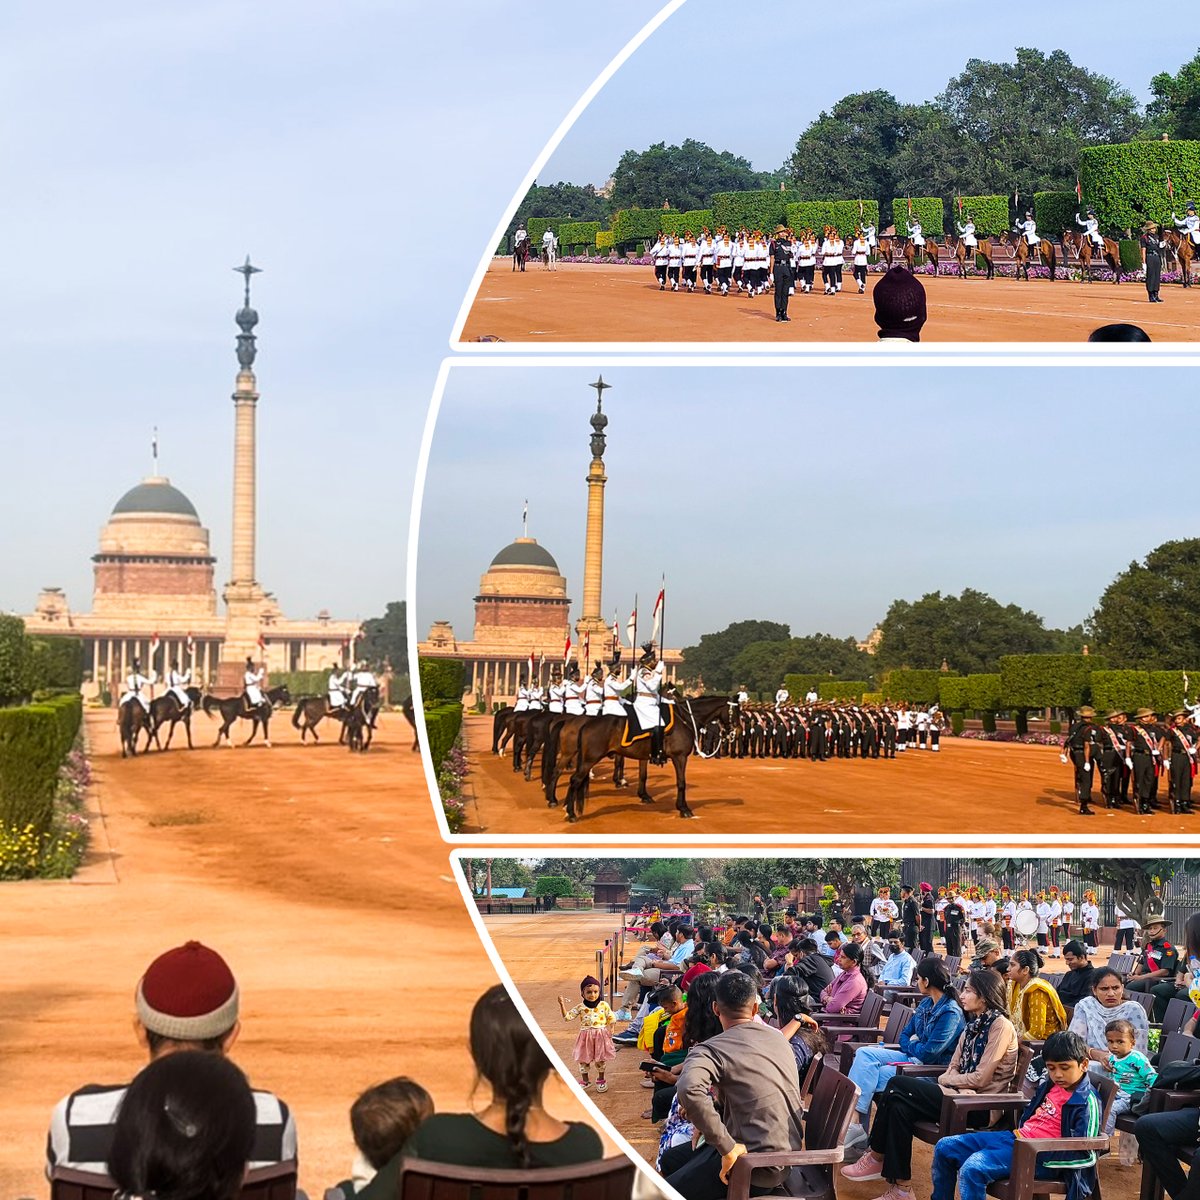 Did You Know?
The Change of Guard Ceremony occurs at the Forecourt of Rashtrapati Bhavan, so it's easier for people to come and experience it.

Experience the Change of Guard Ceremony through a link rb.nic.in/rbvisit/rbvisi…

#Delhi #doyouknow #RashtrapatiBhavan #ChangeOfGuard